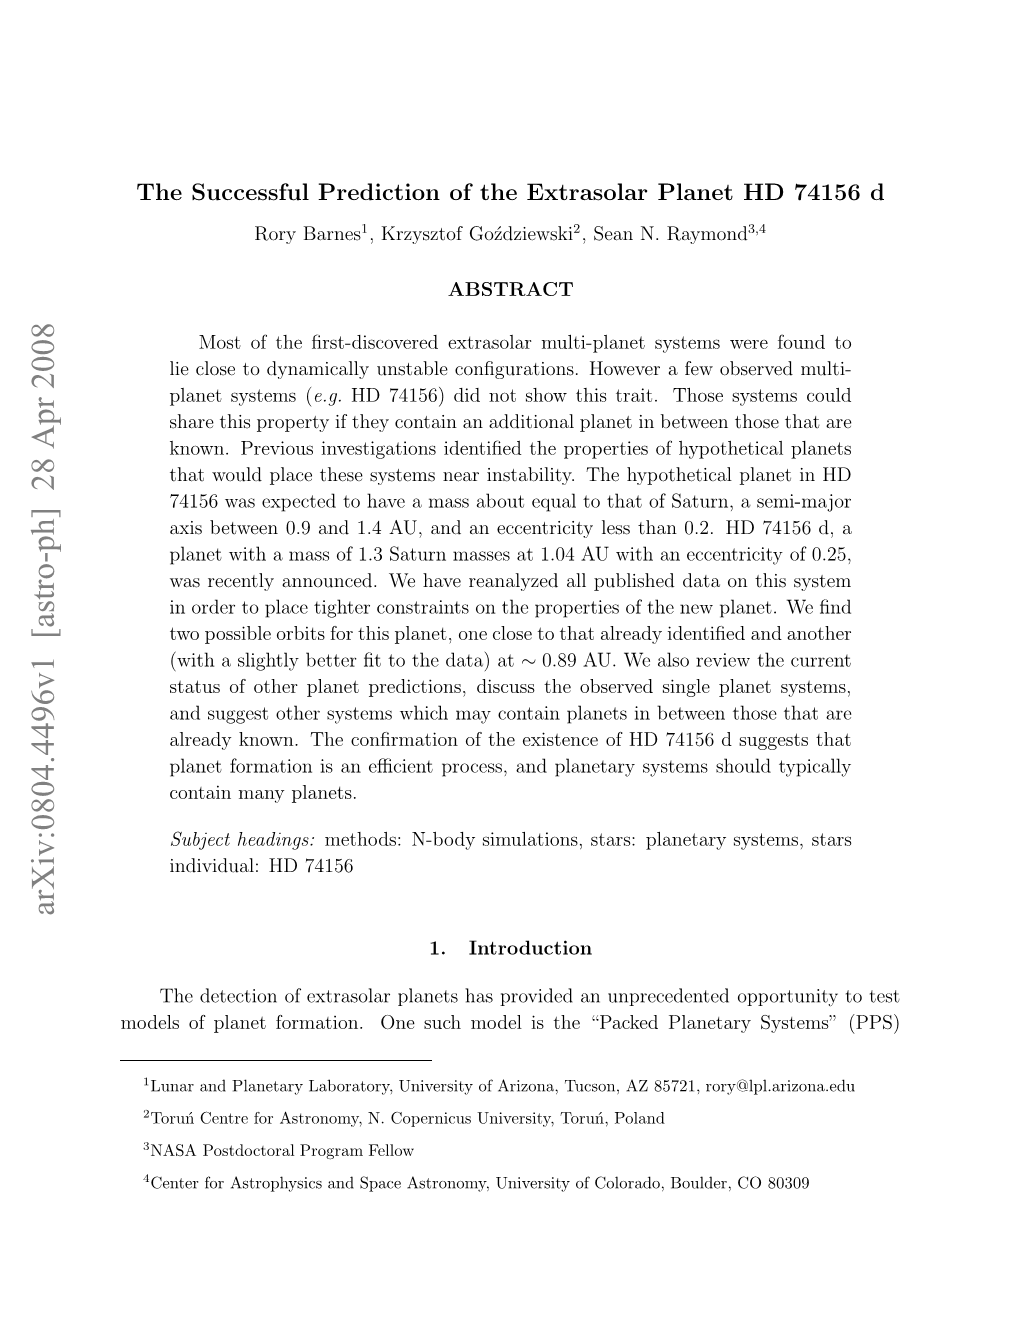 The Successful Prediction of the Extrasolar Planet HD 74156 D